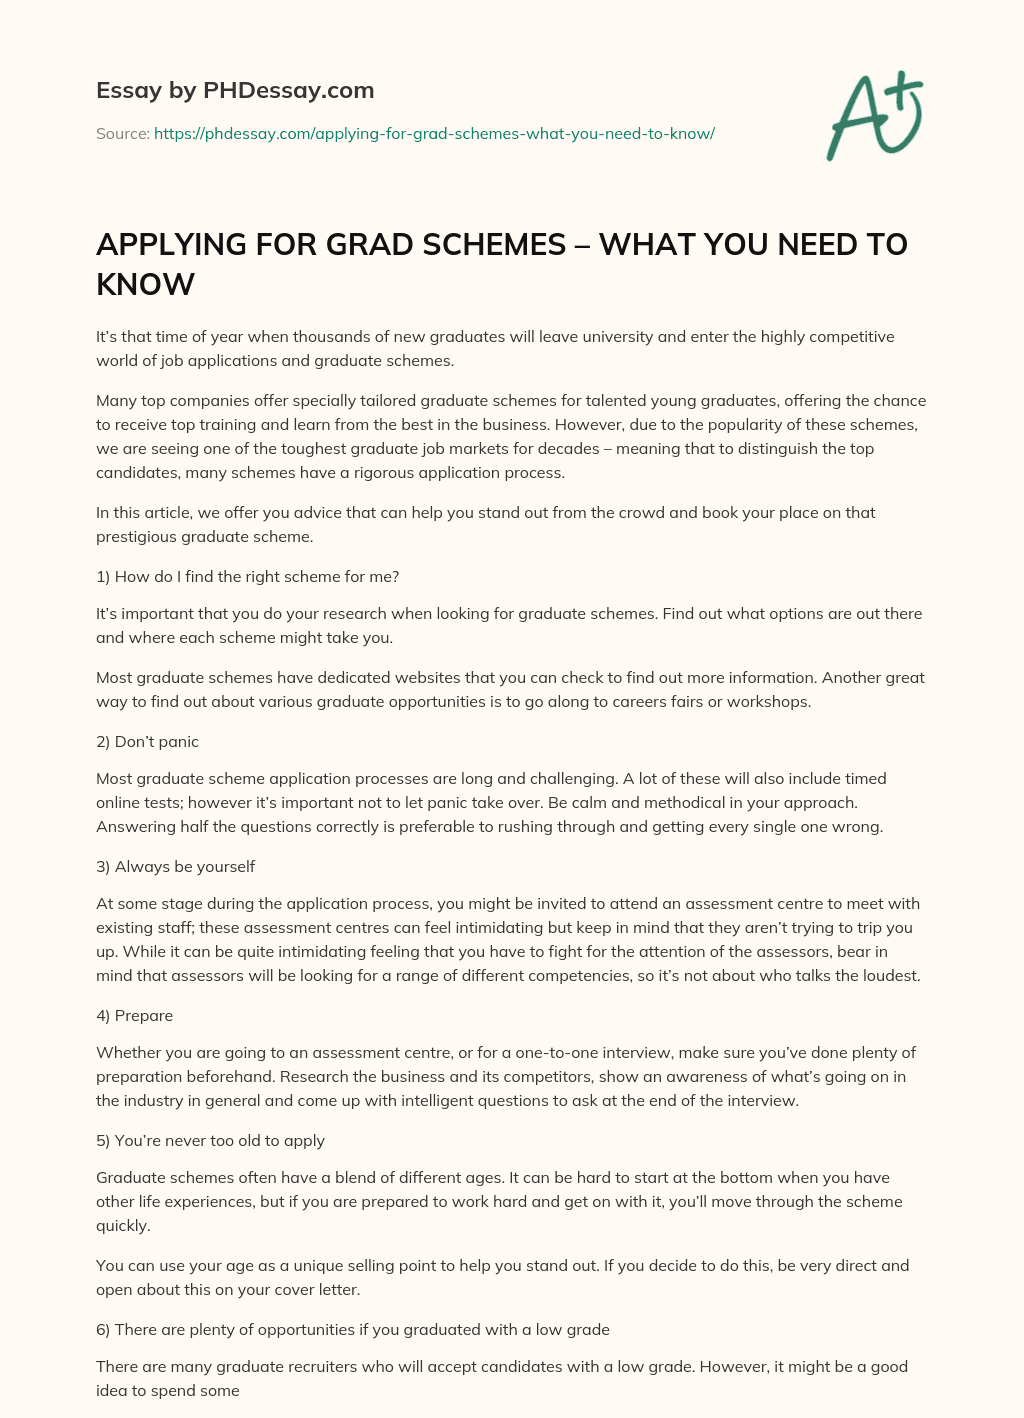 APPLYING FOR GRAD SCHEMES – WHAT YOU NEED TO KNOW essay